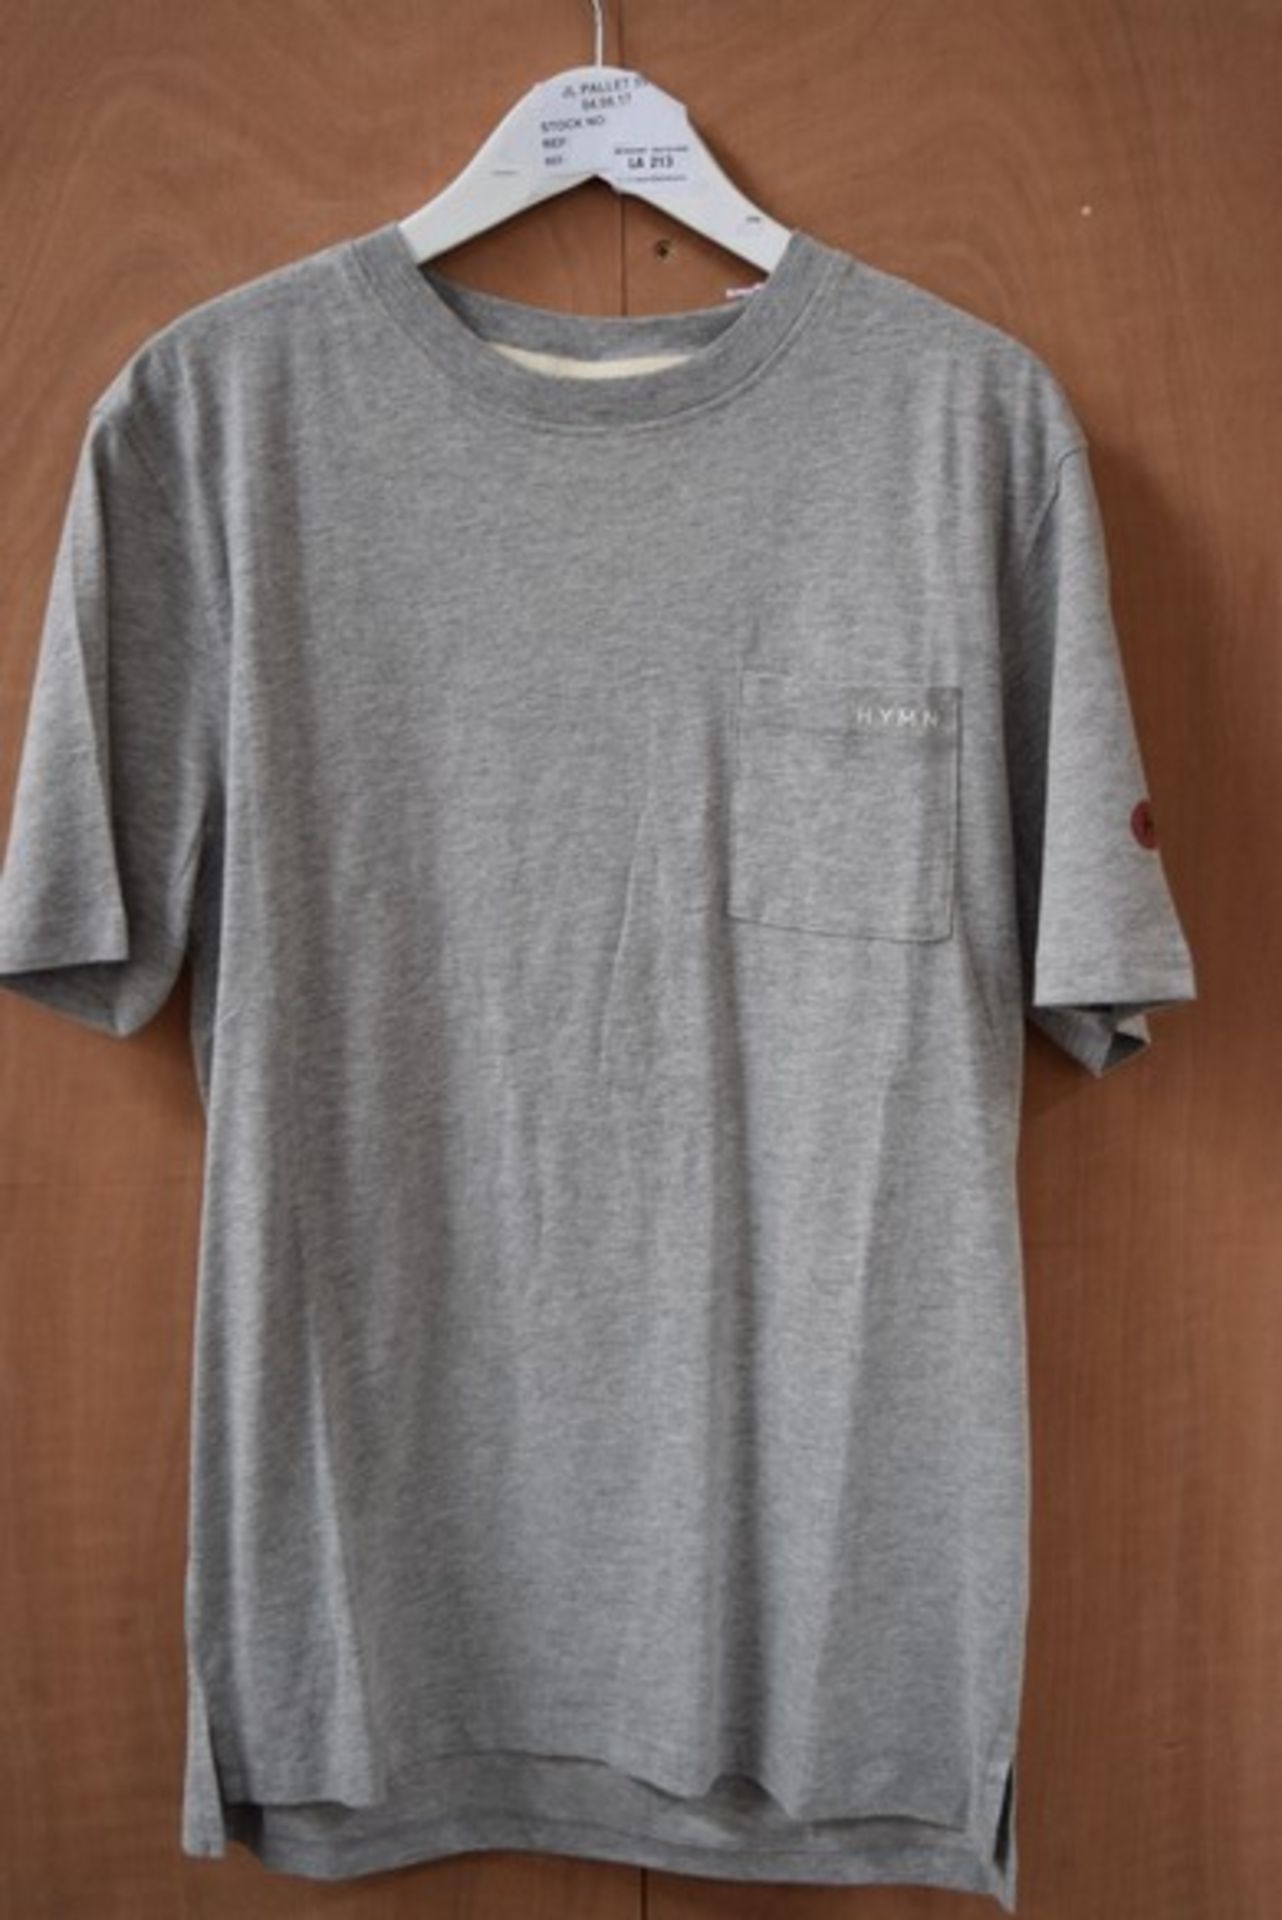 1 x HYMN T-SHIRT SIZE SMALL RRP £35 04.08.17 *PLEASE NOTE THAT THE BID PRICE IS MULTIPLIED BY THE